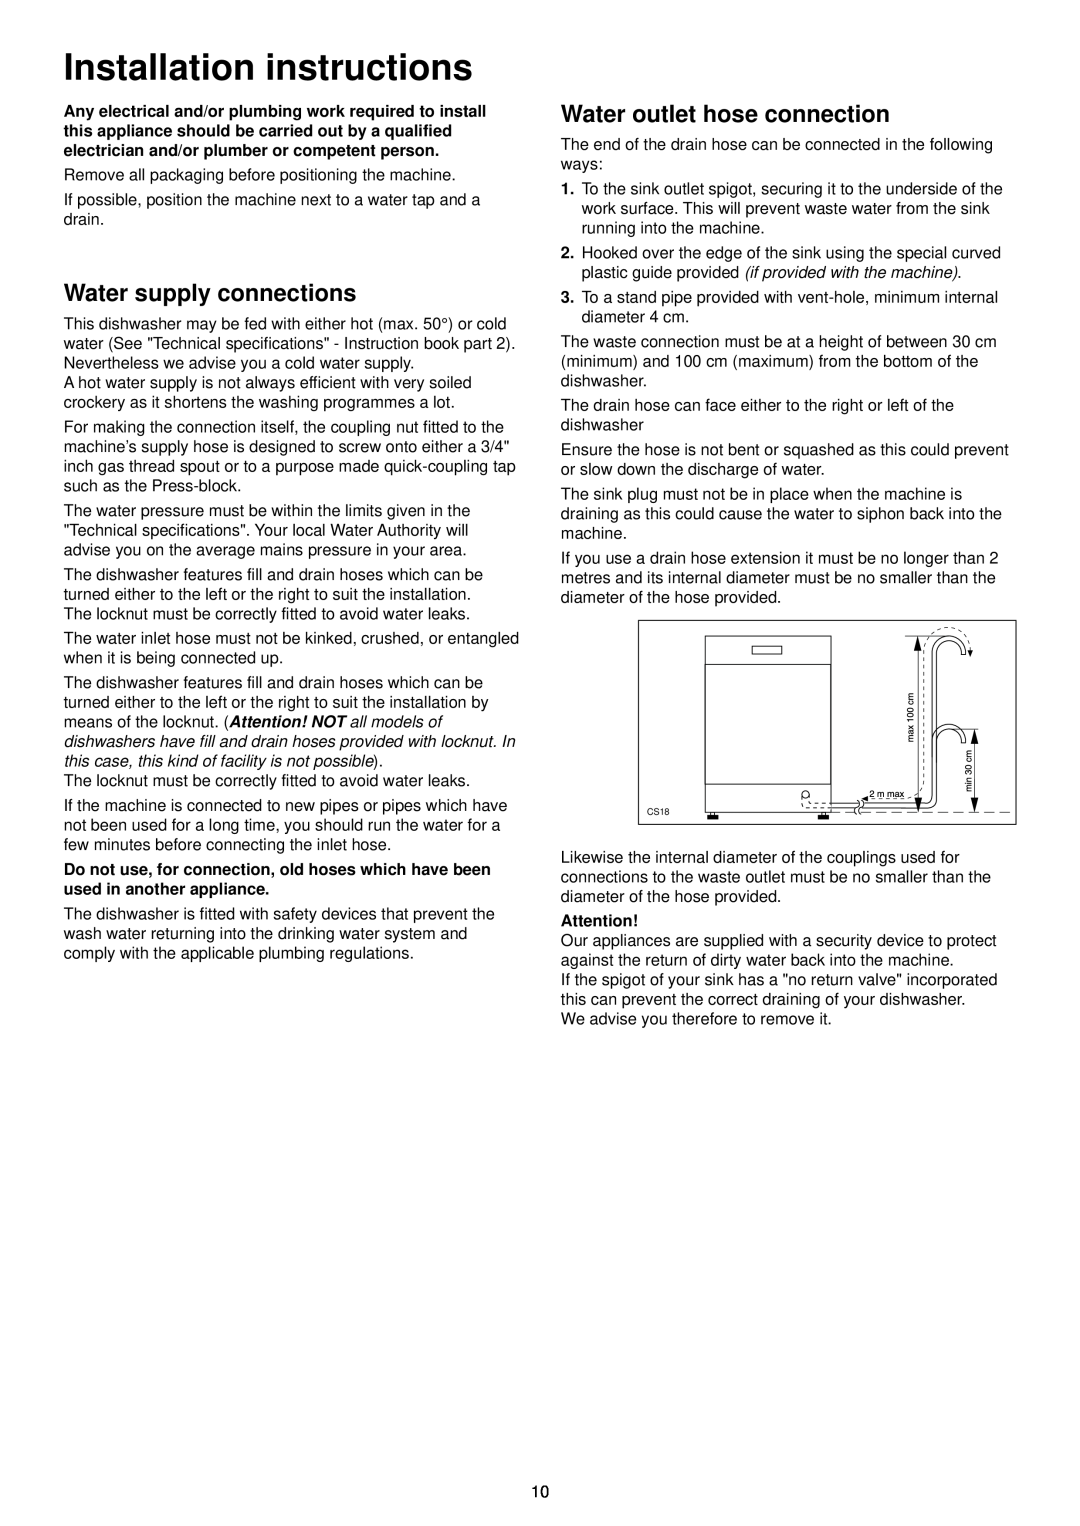 Zanussi DA 6153 manual Installation instructions, Water supply connections, Water outlet hose connection 